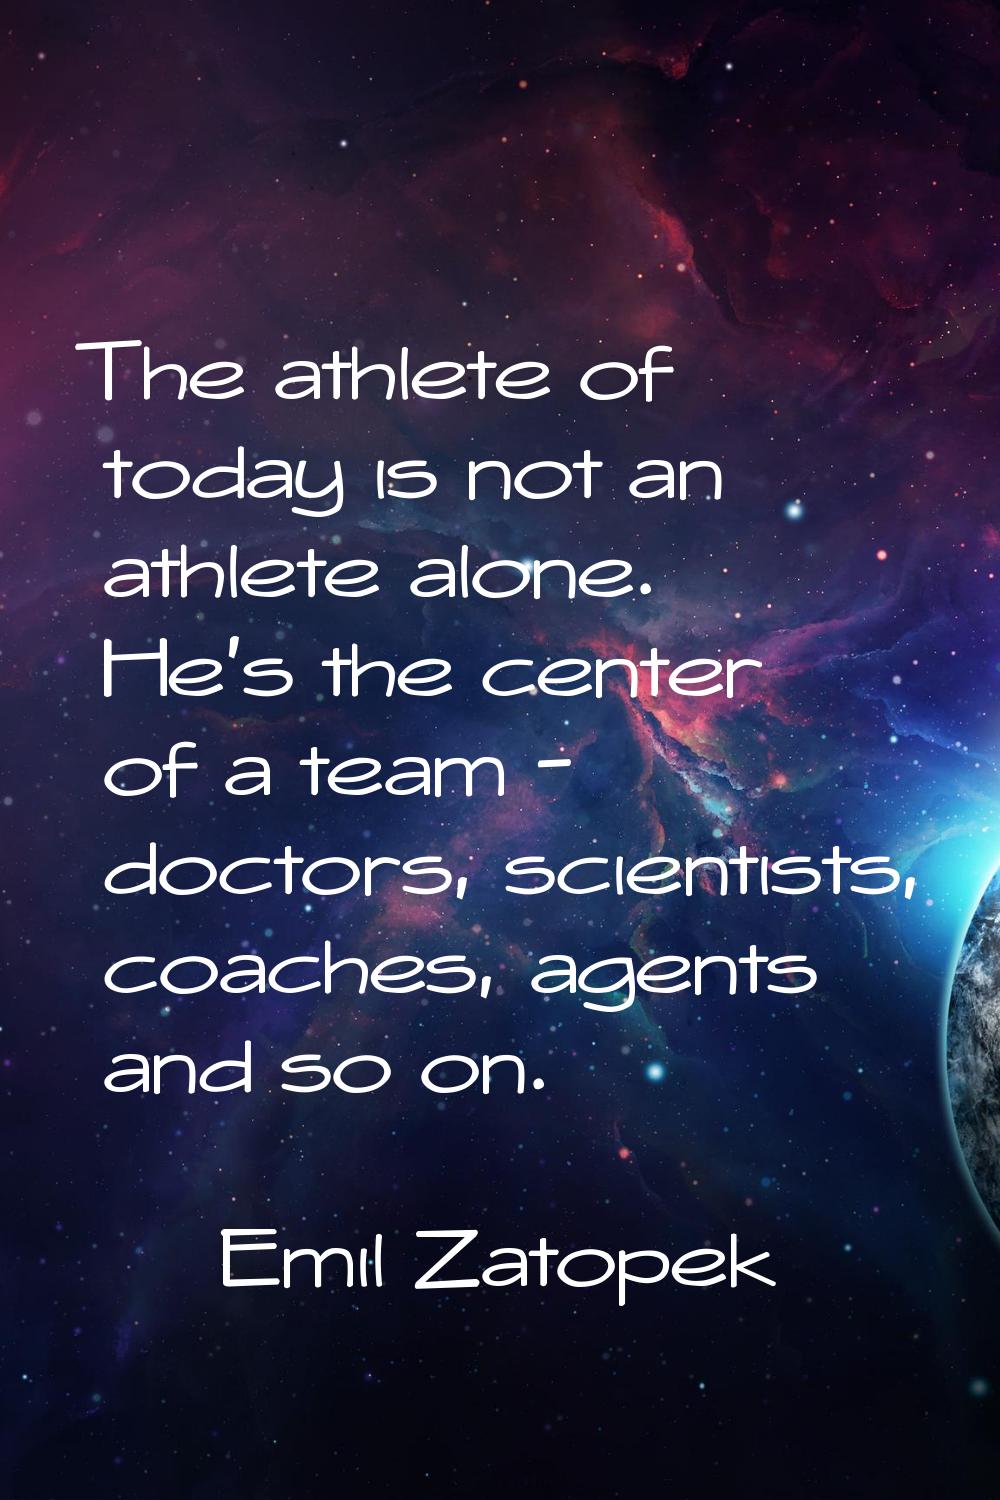 The athlete of today is not an athlete alone. He's the center of a team - doctors, scientists, coac